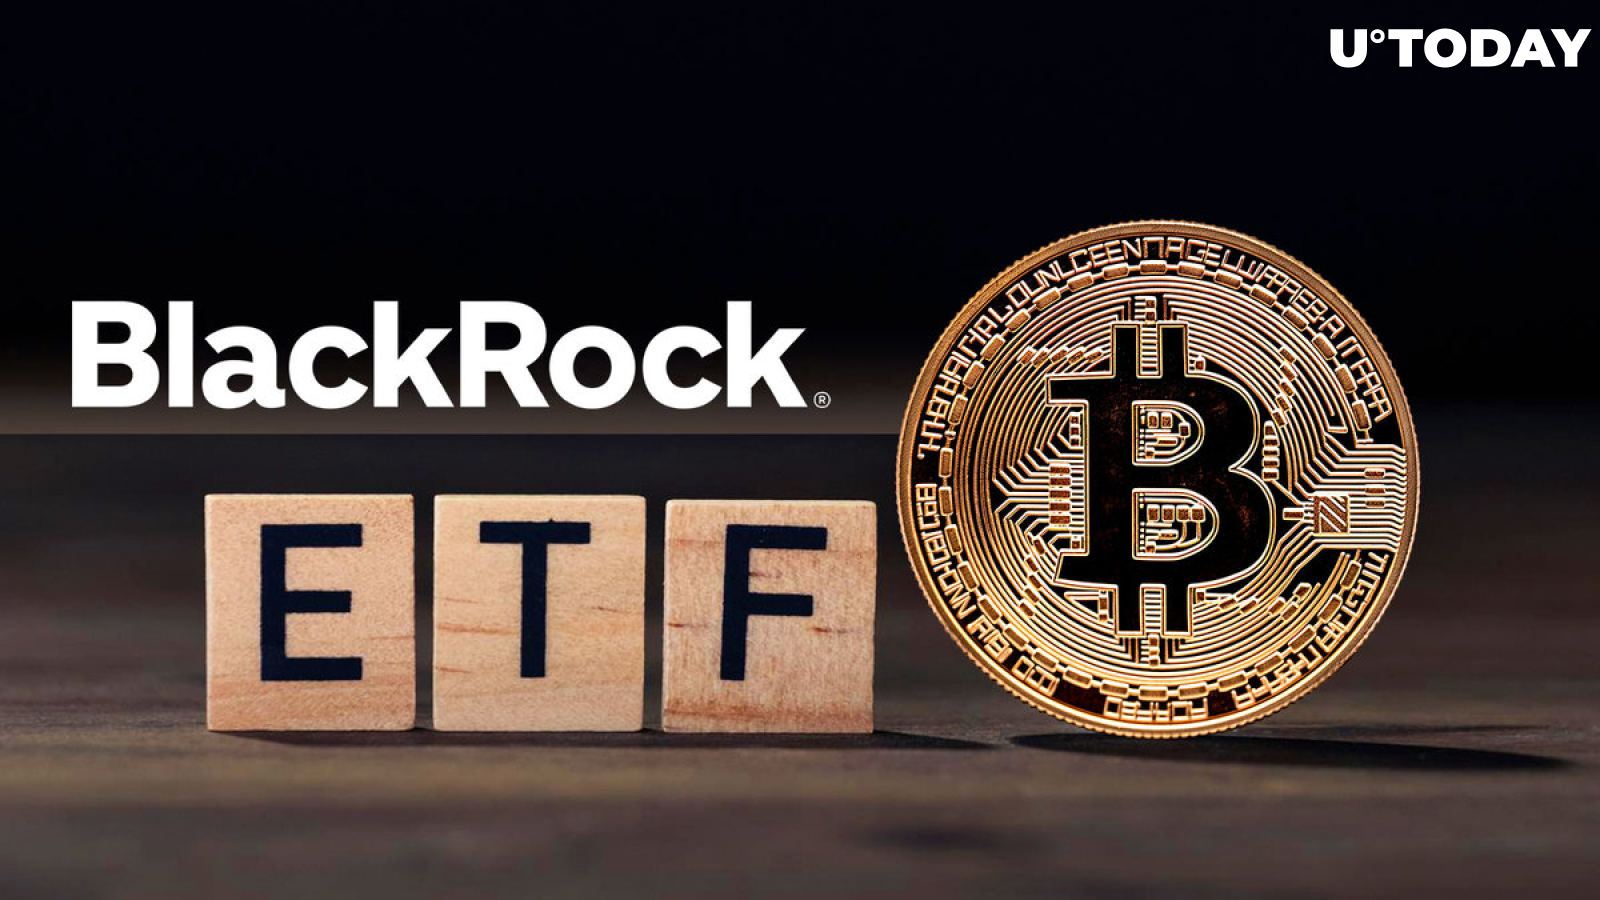 BlackRock's Bitcoin ETF Outshines With $224 Million Inflow Amid Sector-Wide Growth